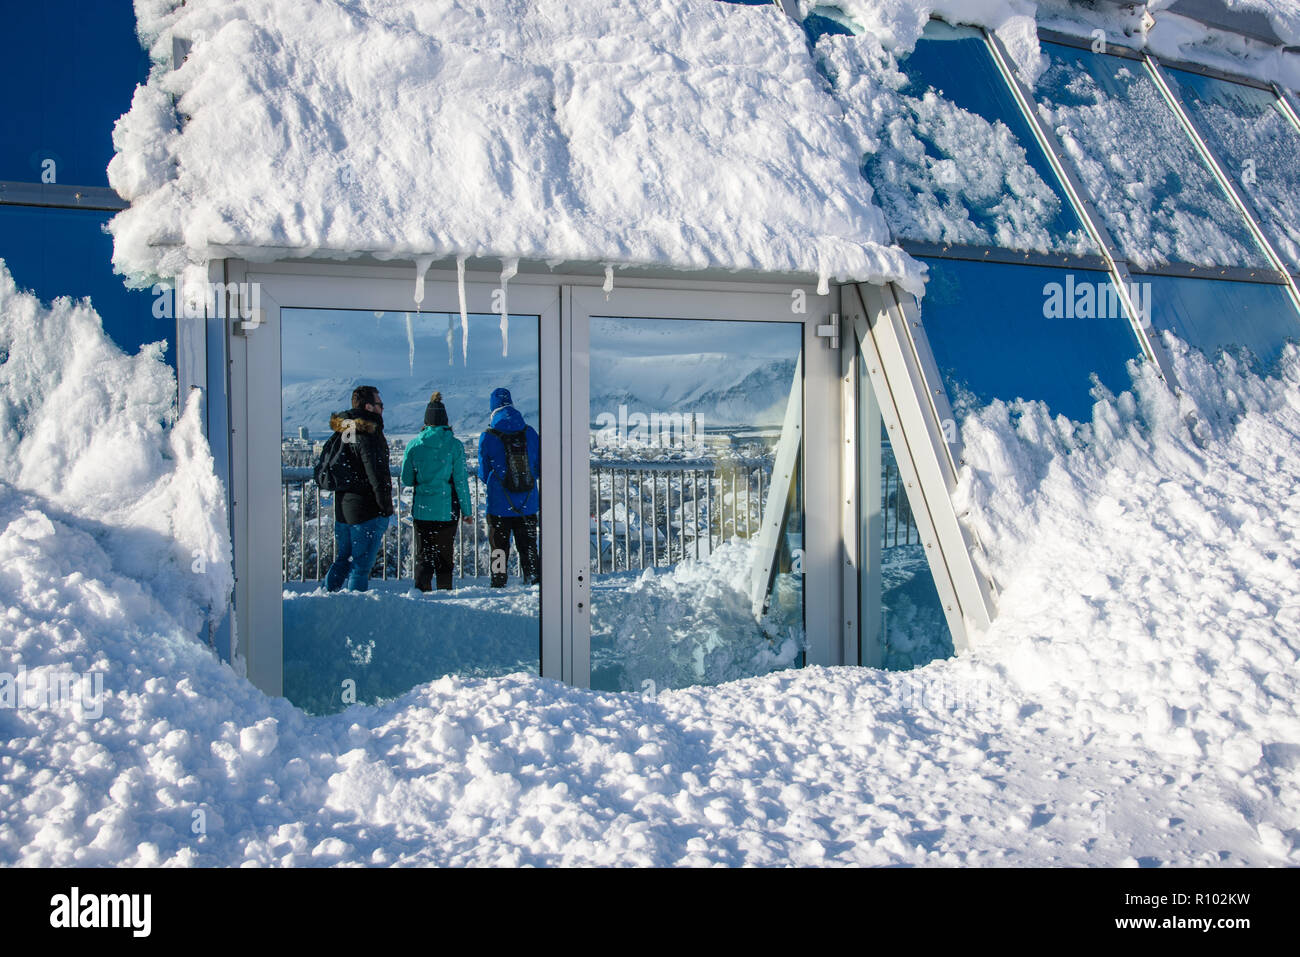 Amazing Iceland in winter - breathtaking scenery and frozen landscapes -  reflection of young people overlooking the white city of Reykjavik Stock  Photo - Alamy